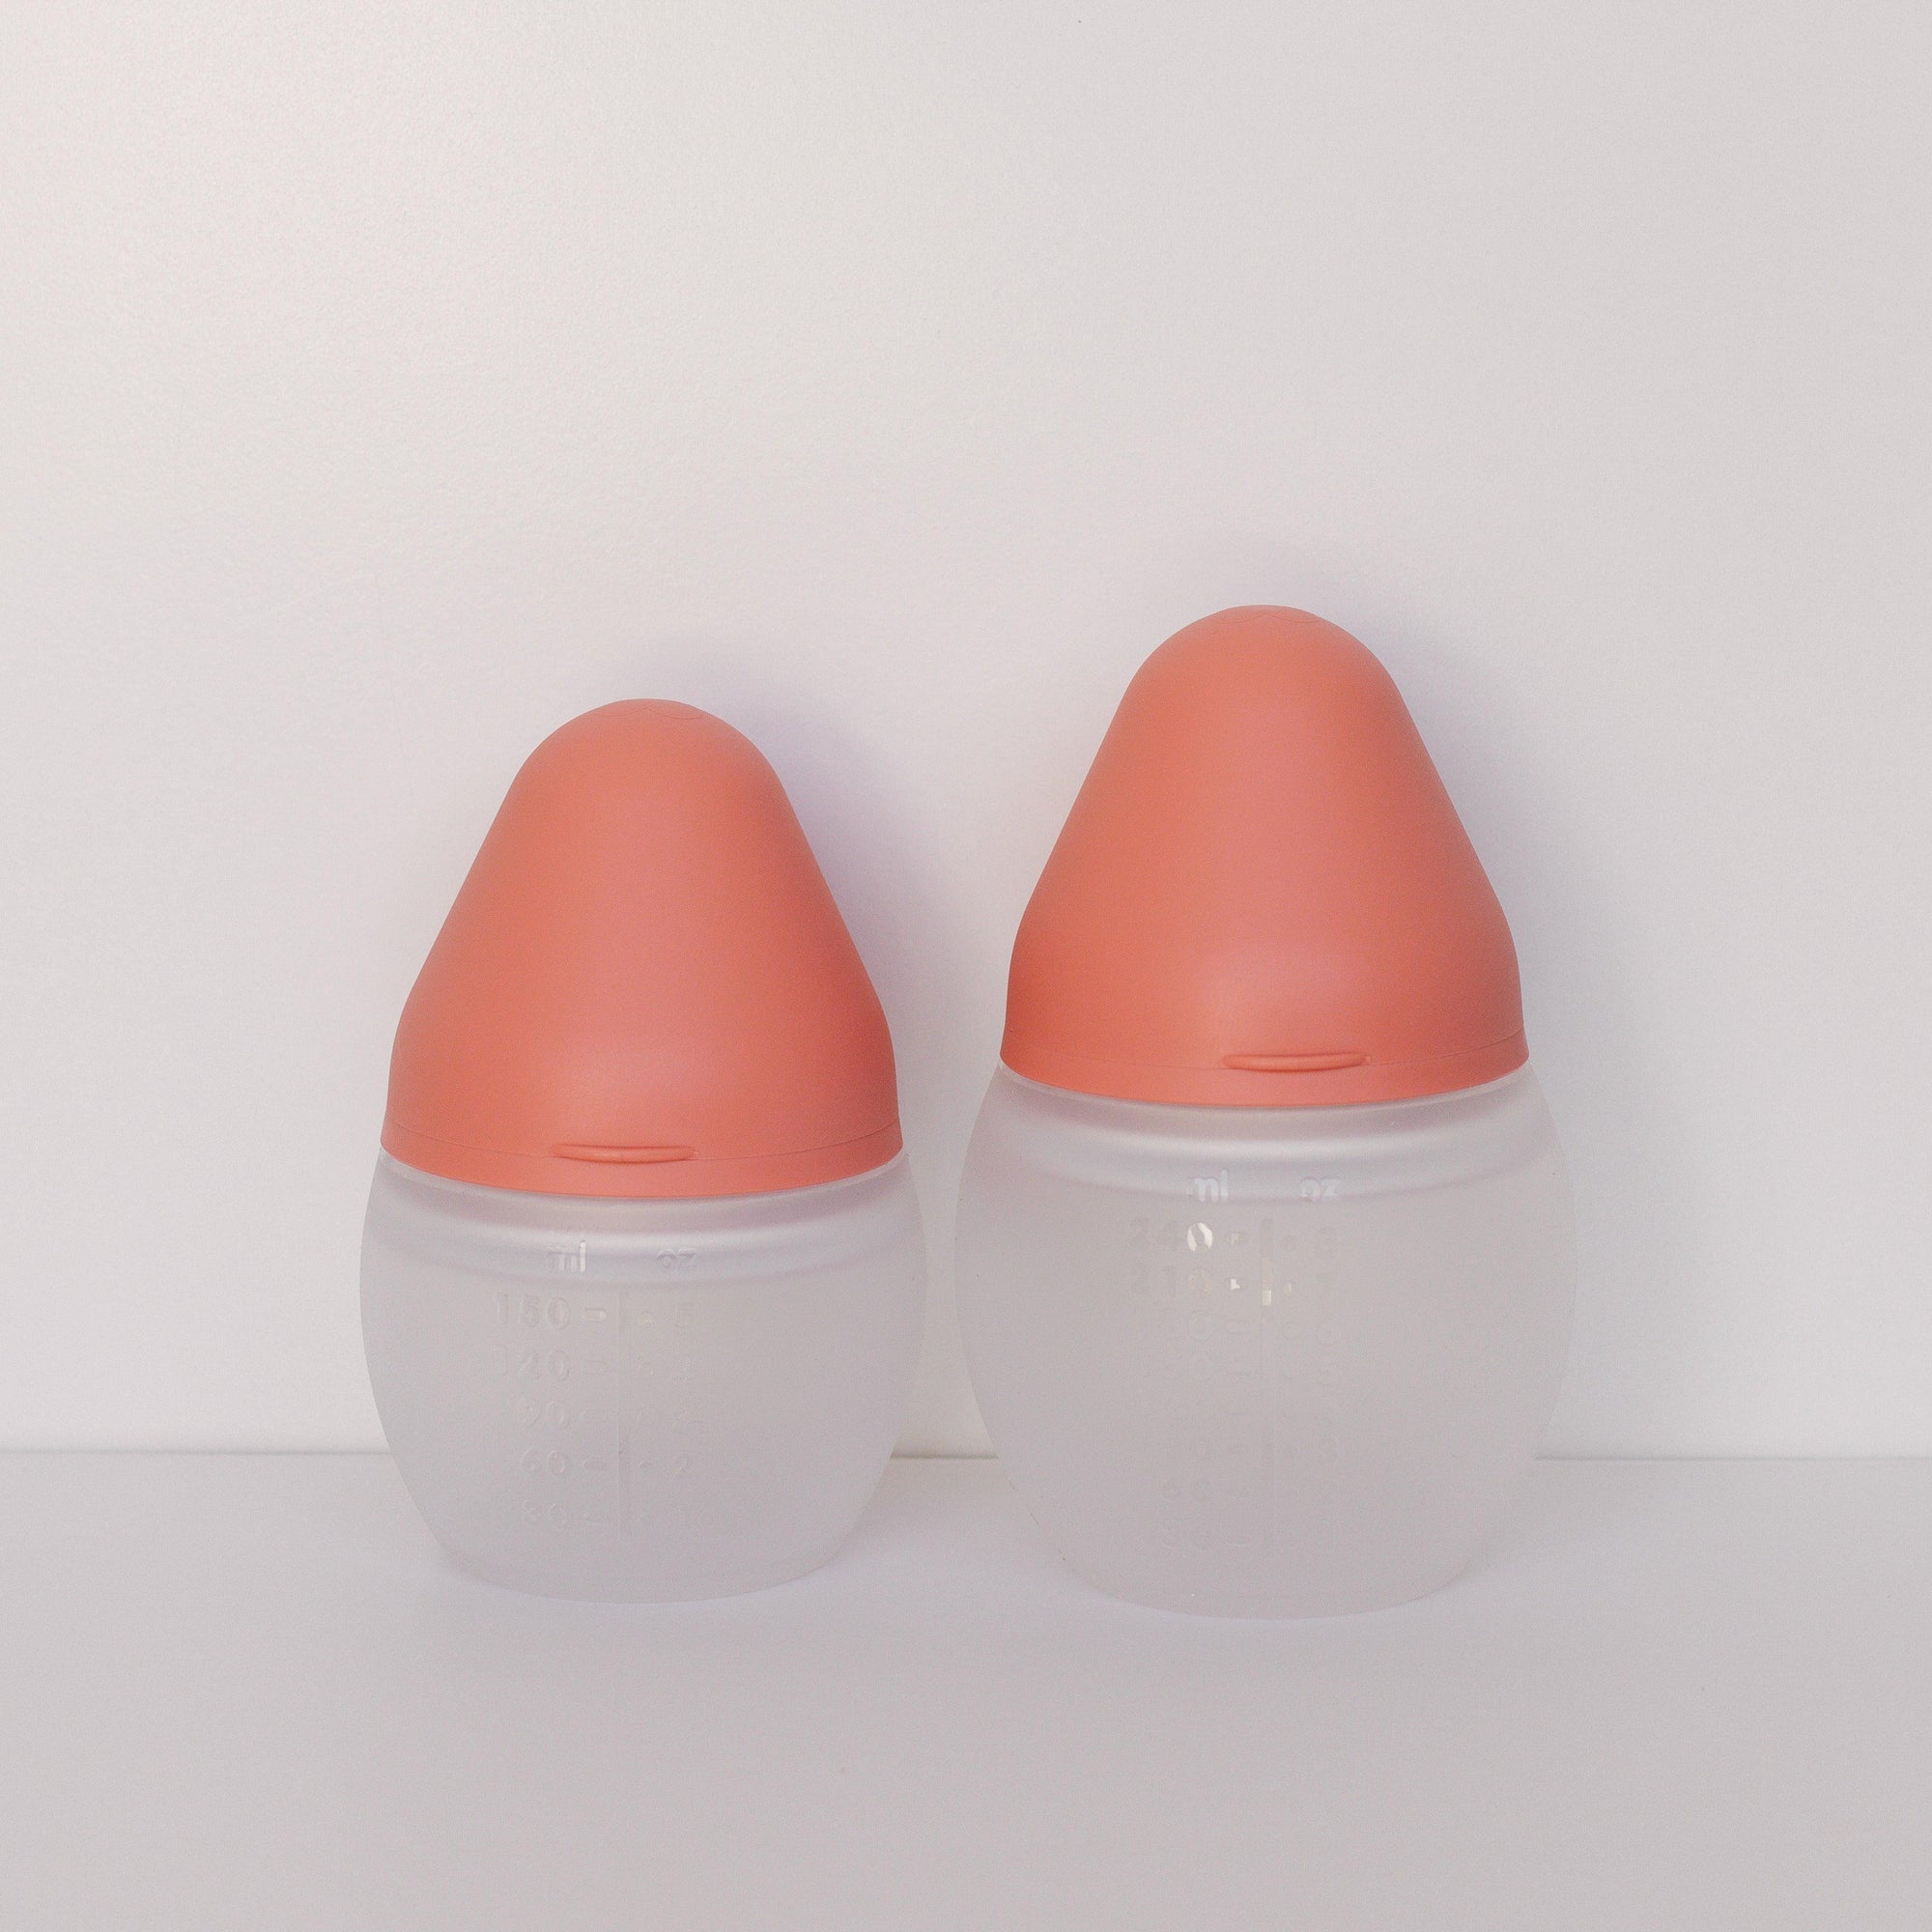 Two BibRond summer coral baby bottles by Elhée France standing against a white surface.